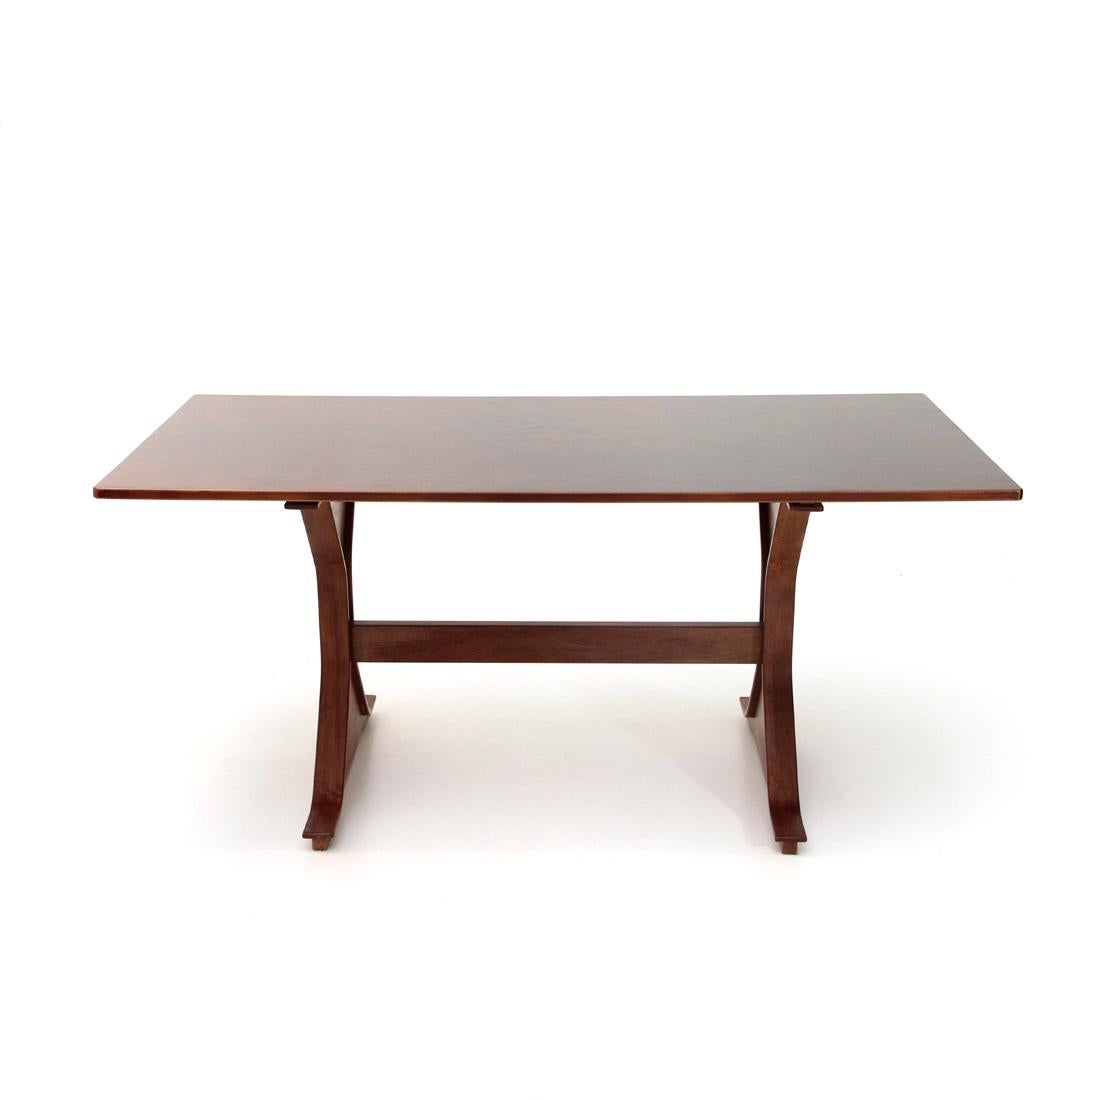 Table produced by Bernini based on a project by Gianfranco Frattini in the 1960s.
Rectangular top in veneered wood.
Playwood veneered structure.
Good general conditions, some signs and lack of veneer due to normal use over